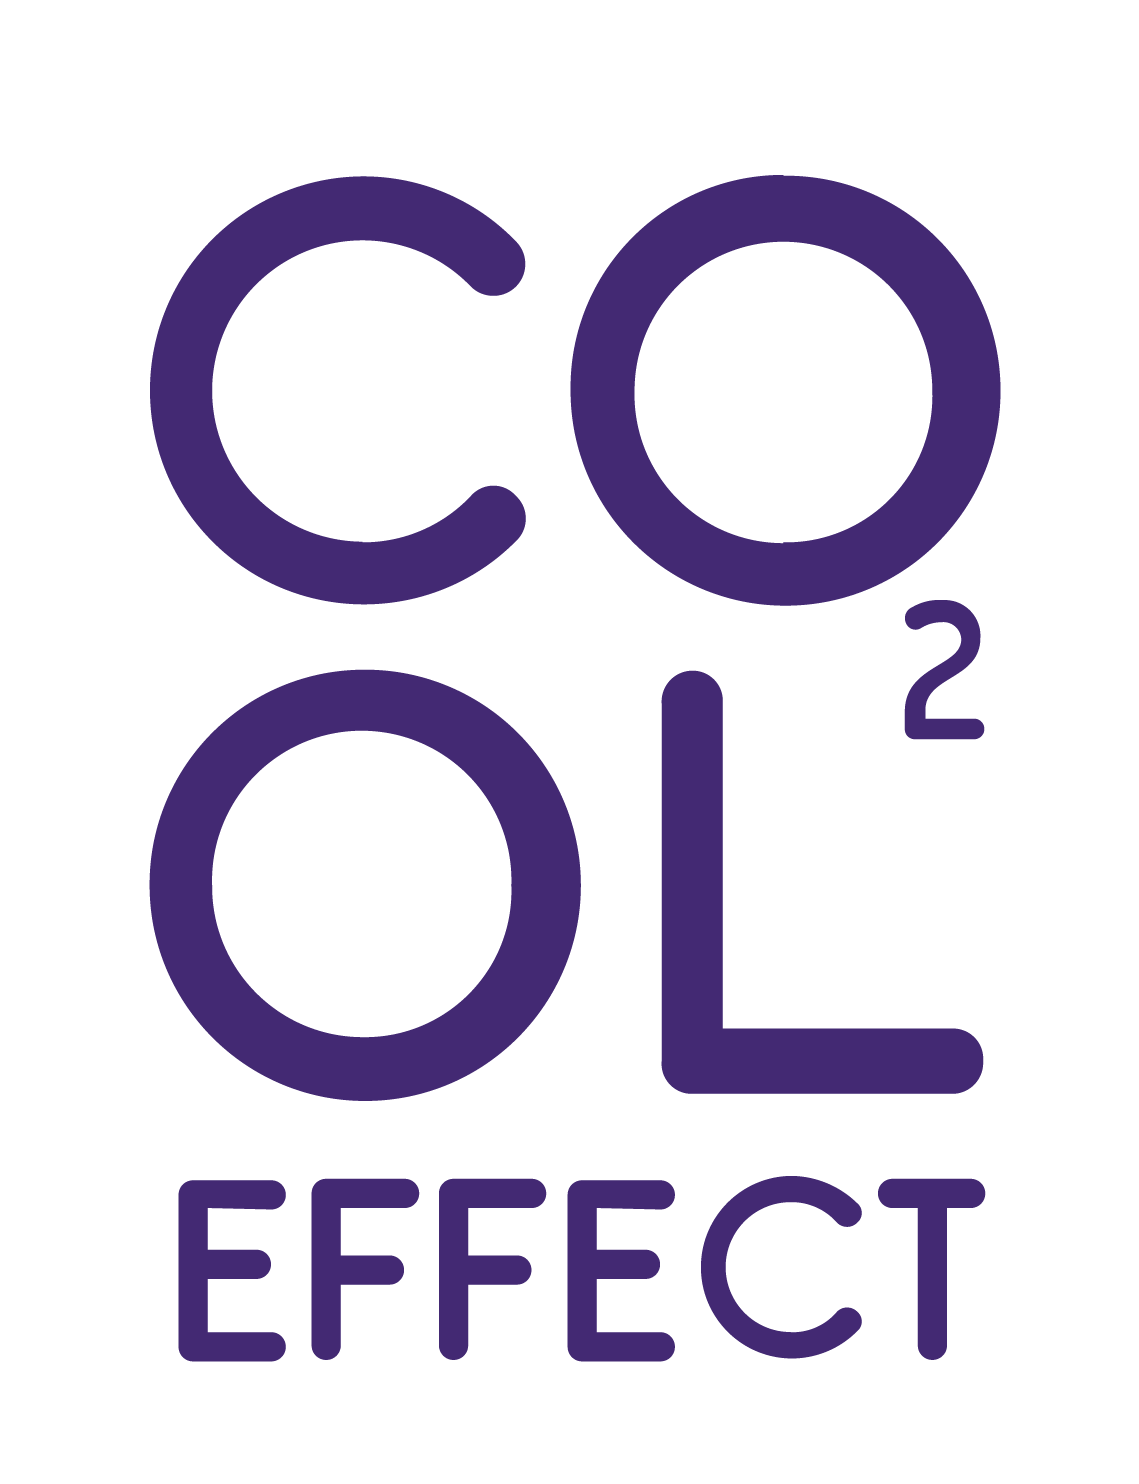 Cool Effect is a San Francisco Bay Area 501(c)(3) nonprofit dedicated to reducing carbon emissions around the world.